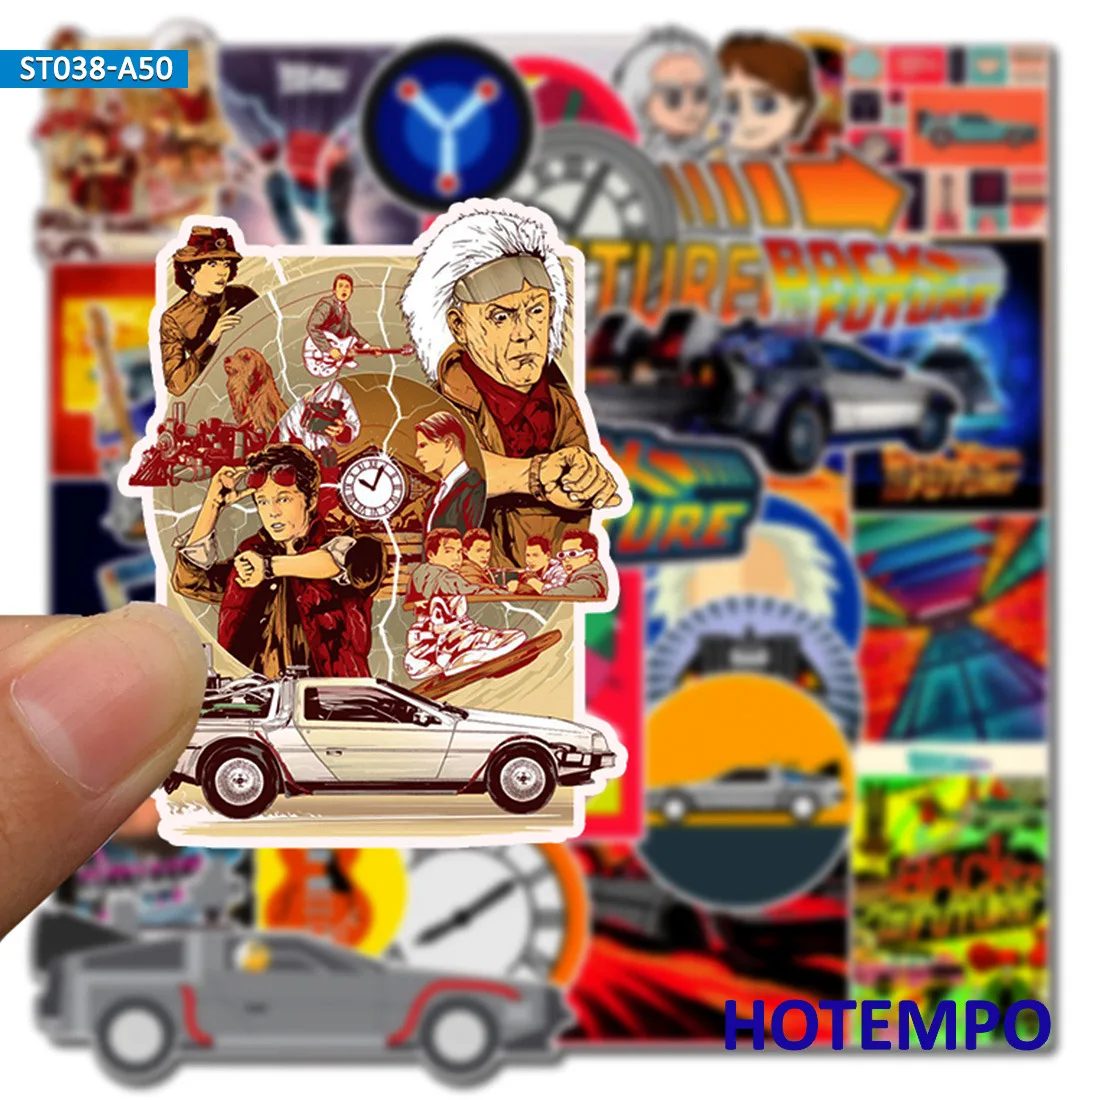 50pcs Classic Movie Back To The Future Stickers for Mobile Phone Laptop Luggage Case Skateboard Bike Helmet Style Decal Stickers